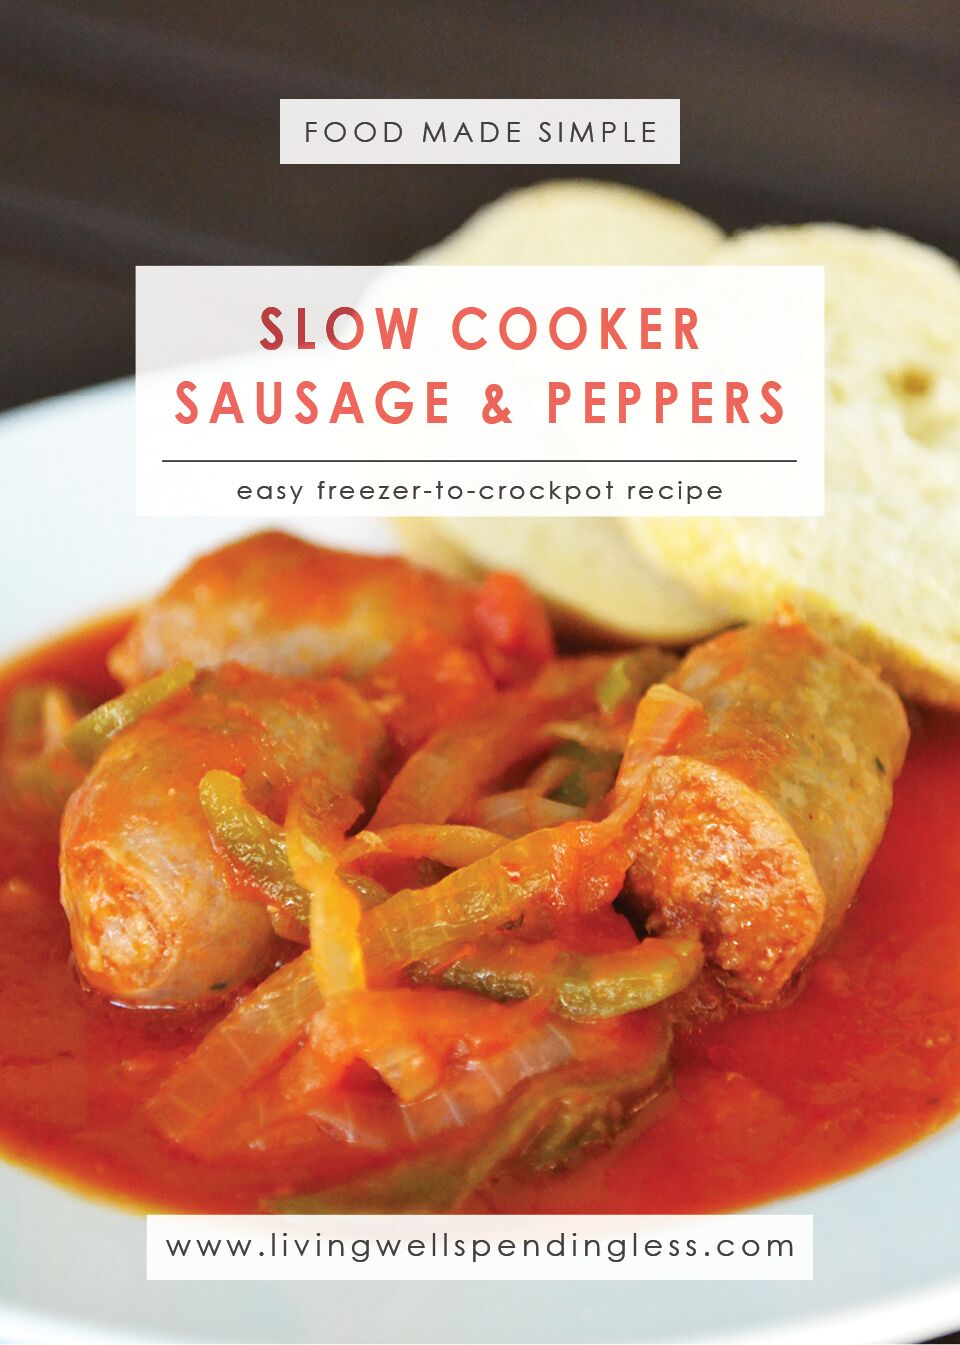 Slow Cooker Sausage and Peppers | Living Well Spending Less®